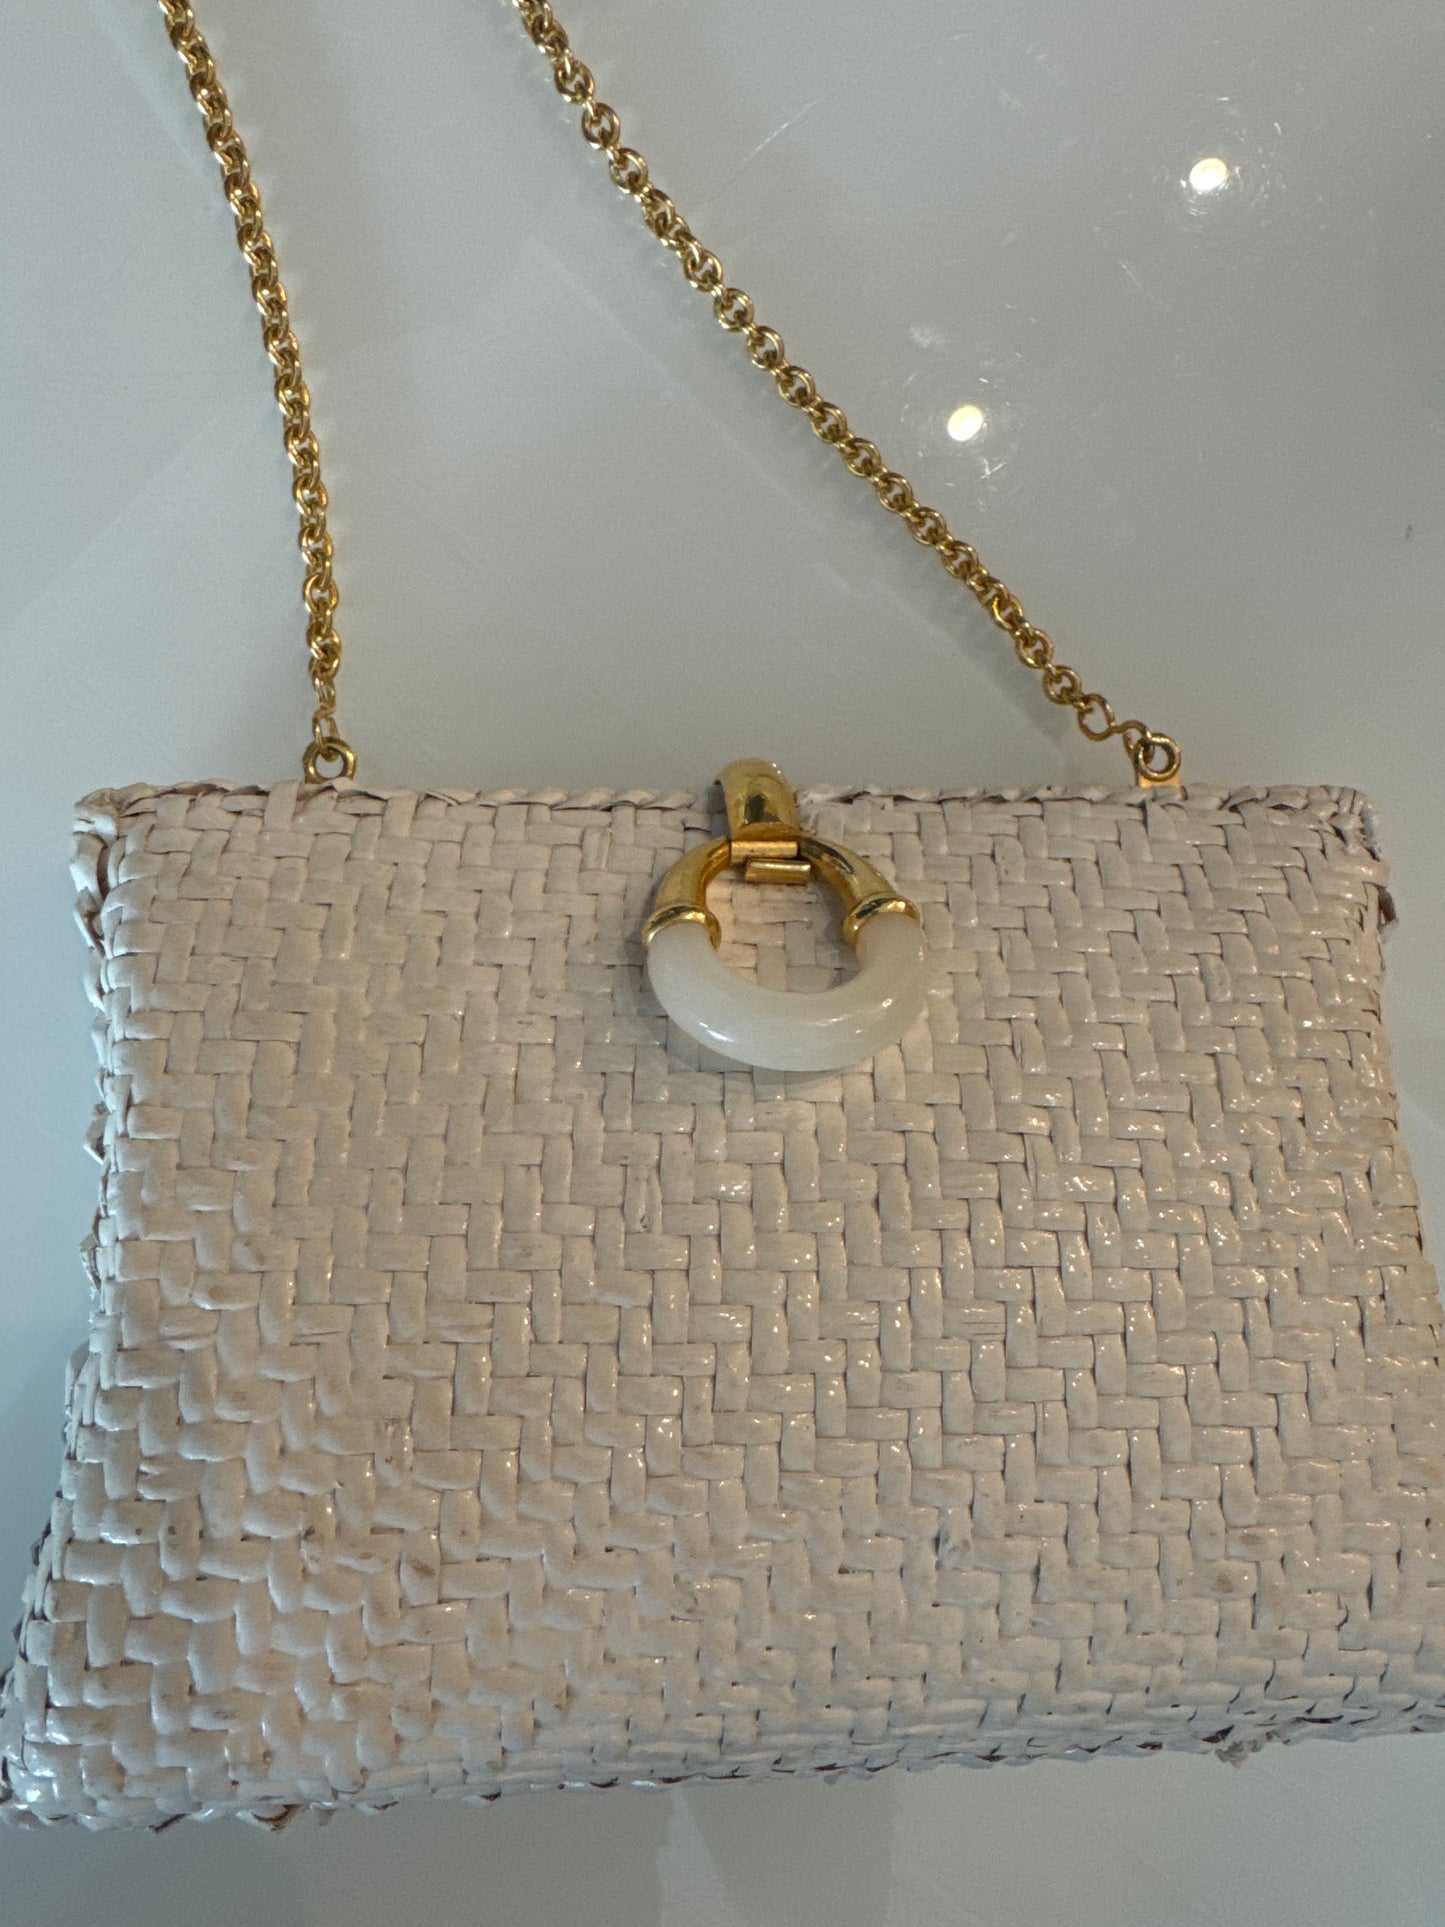 White rattan/wicker clutch with gold hardware and hidden shoulder strap